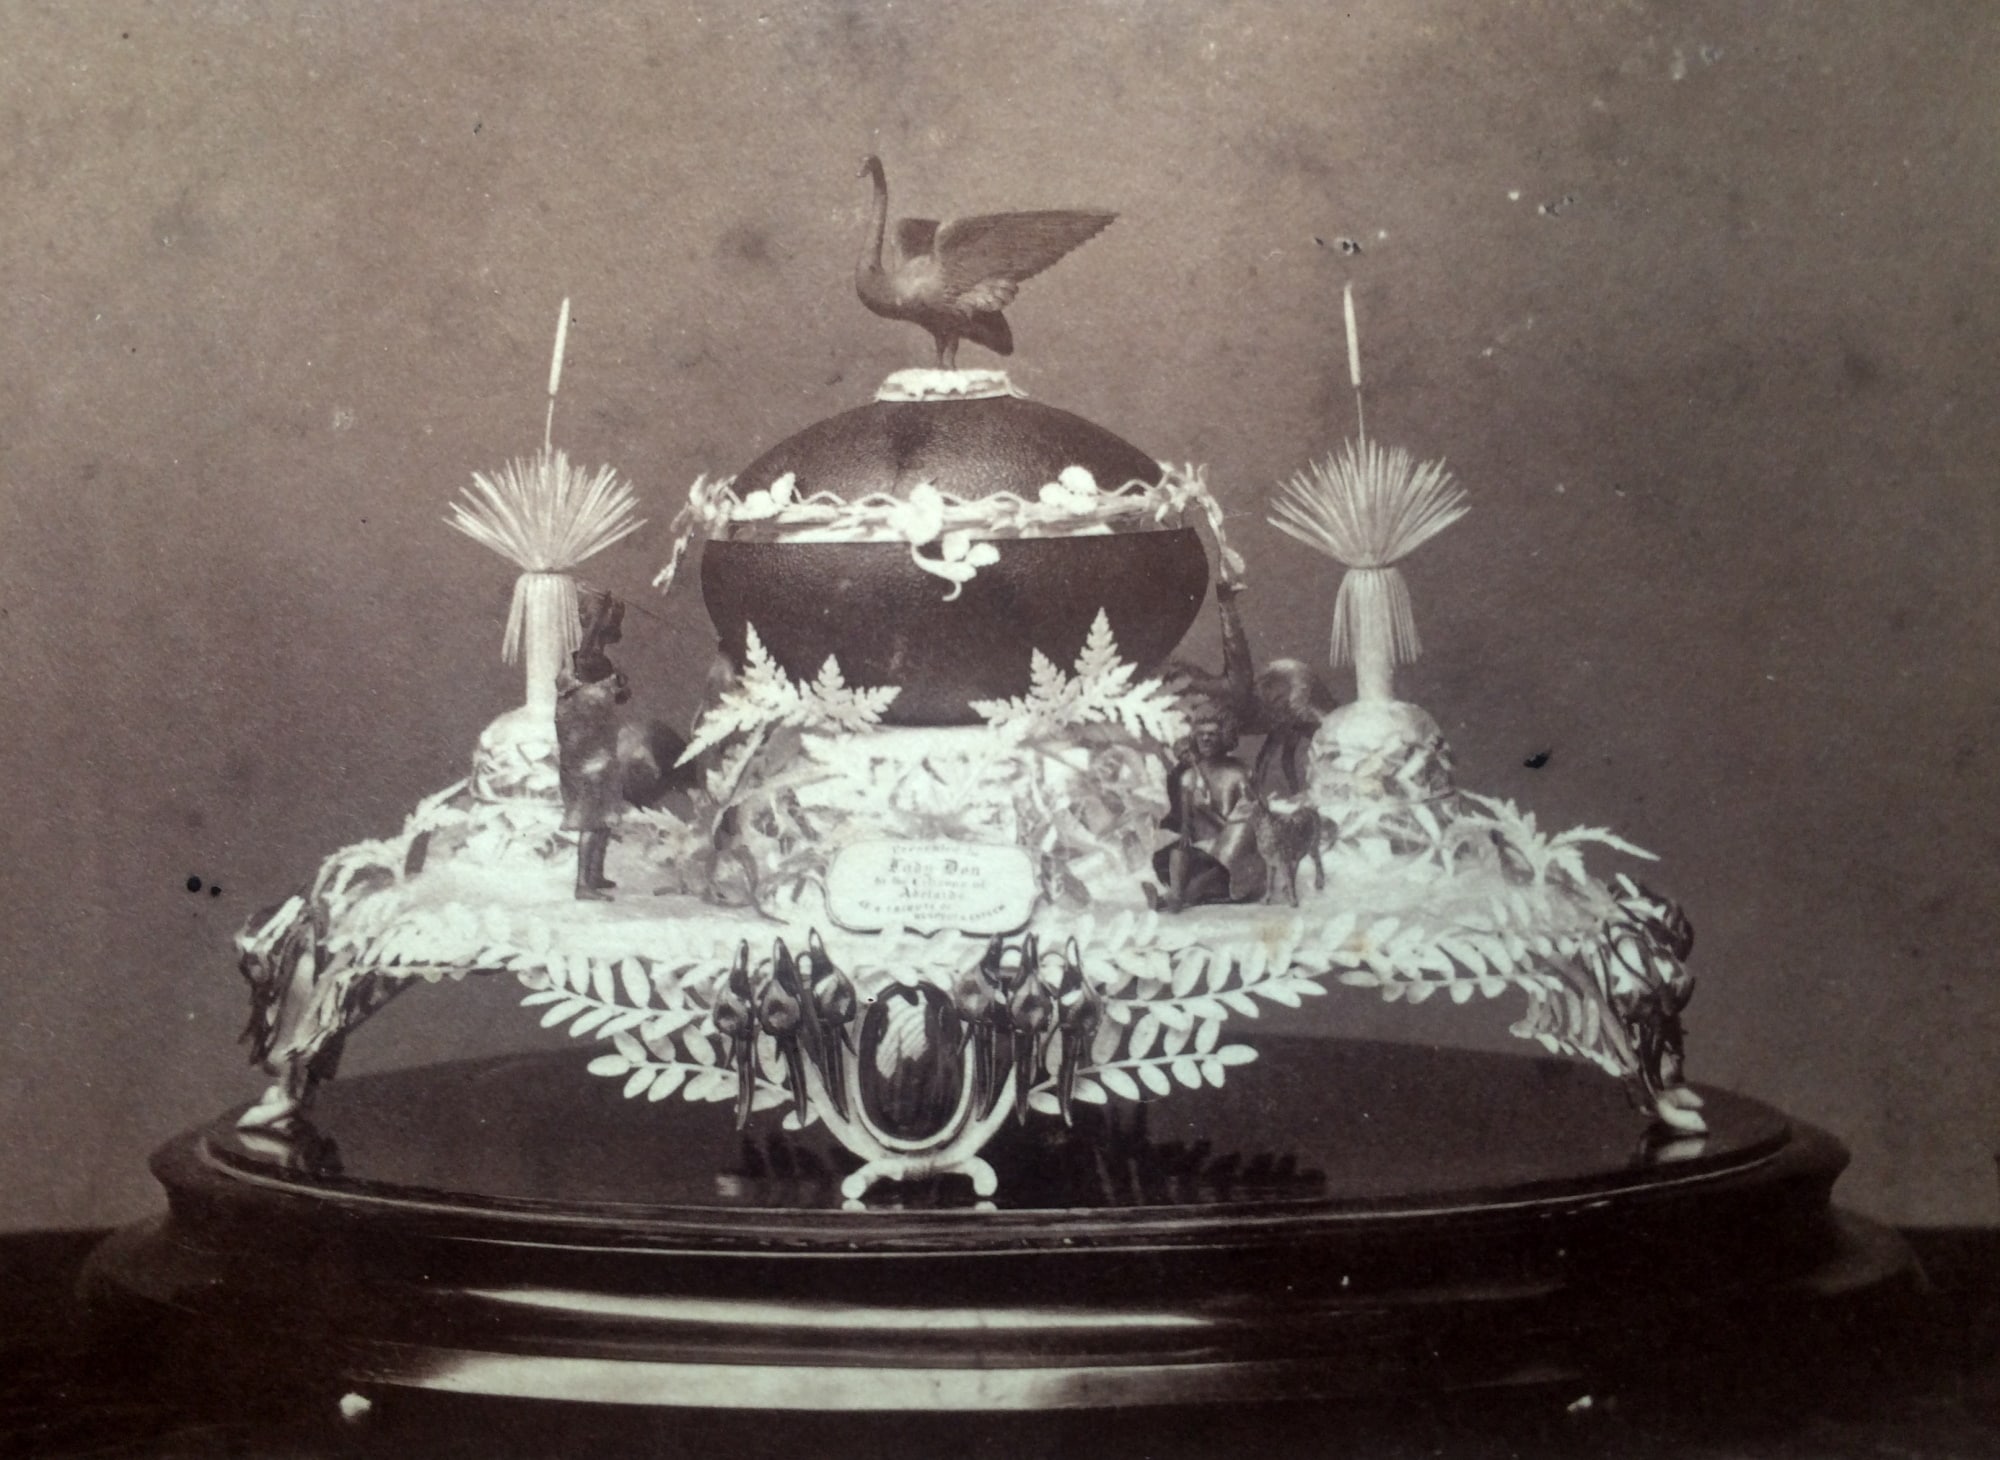 Inkstand and jewel case, by Joachim Matthias Wendt, presented to Emily Don, Adelaide, 22 August 1865 (photo: Townsend Duryea)